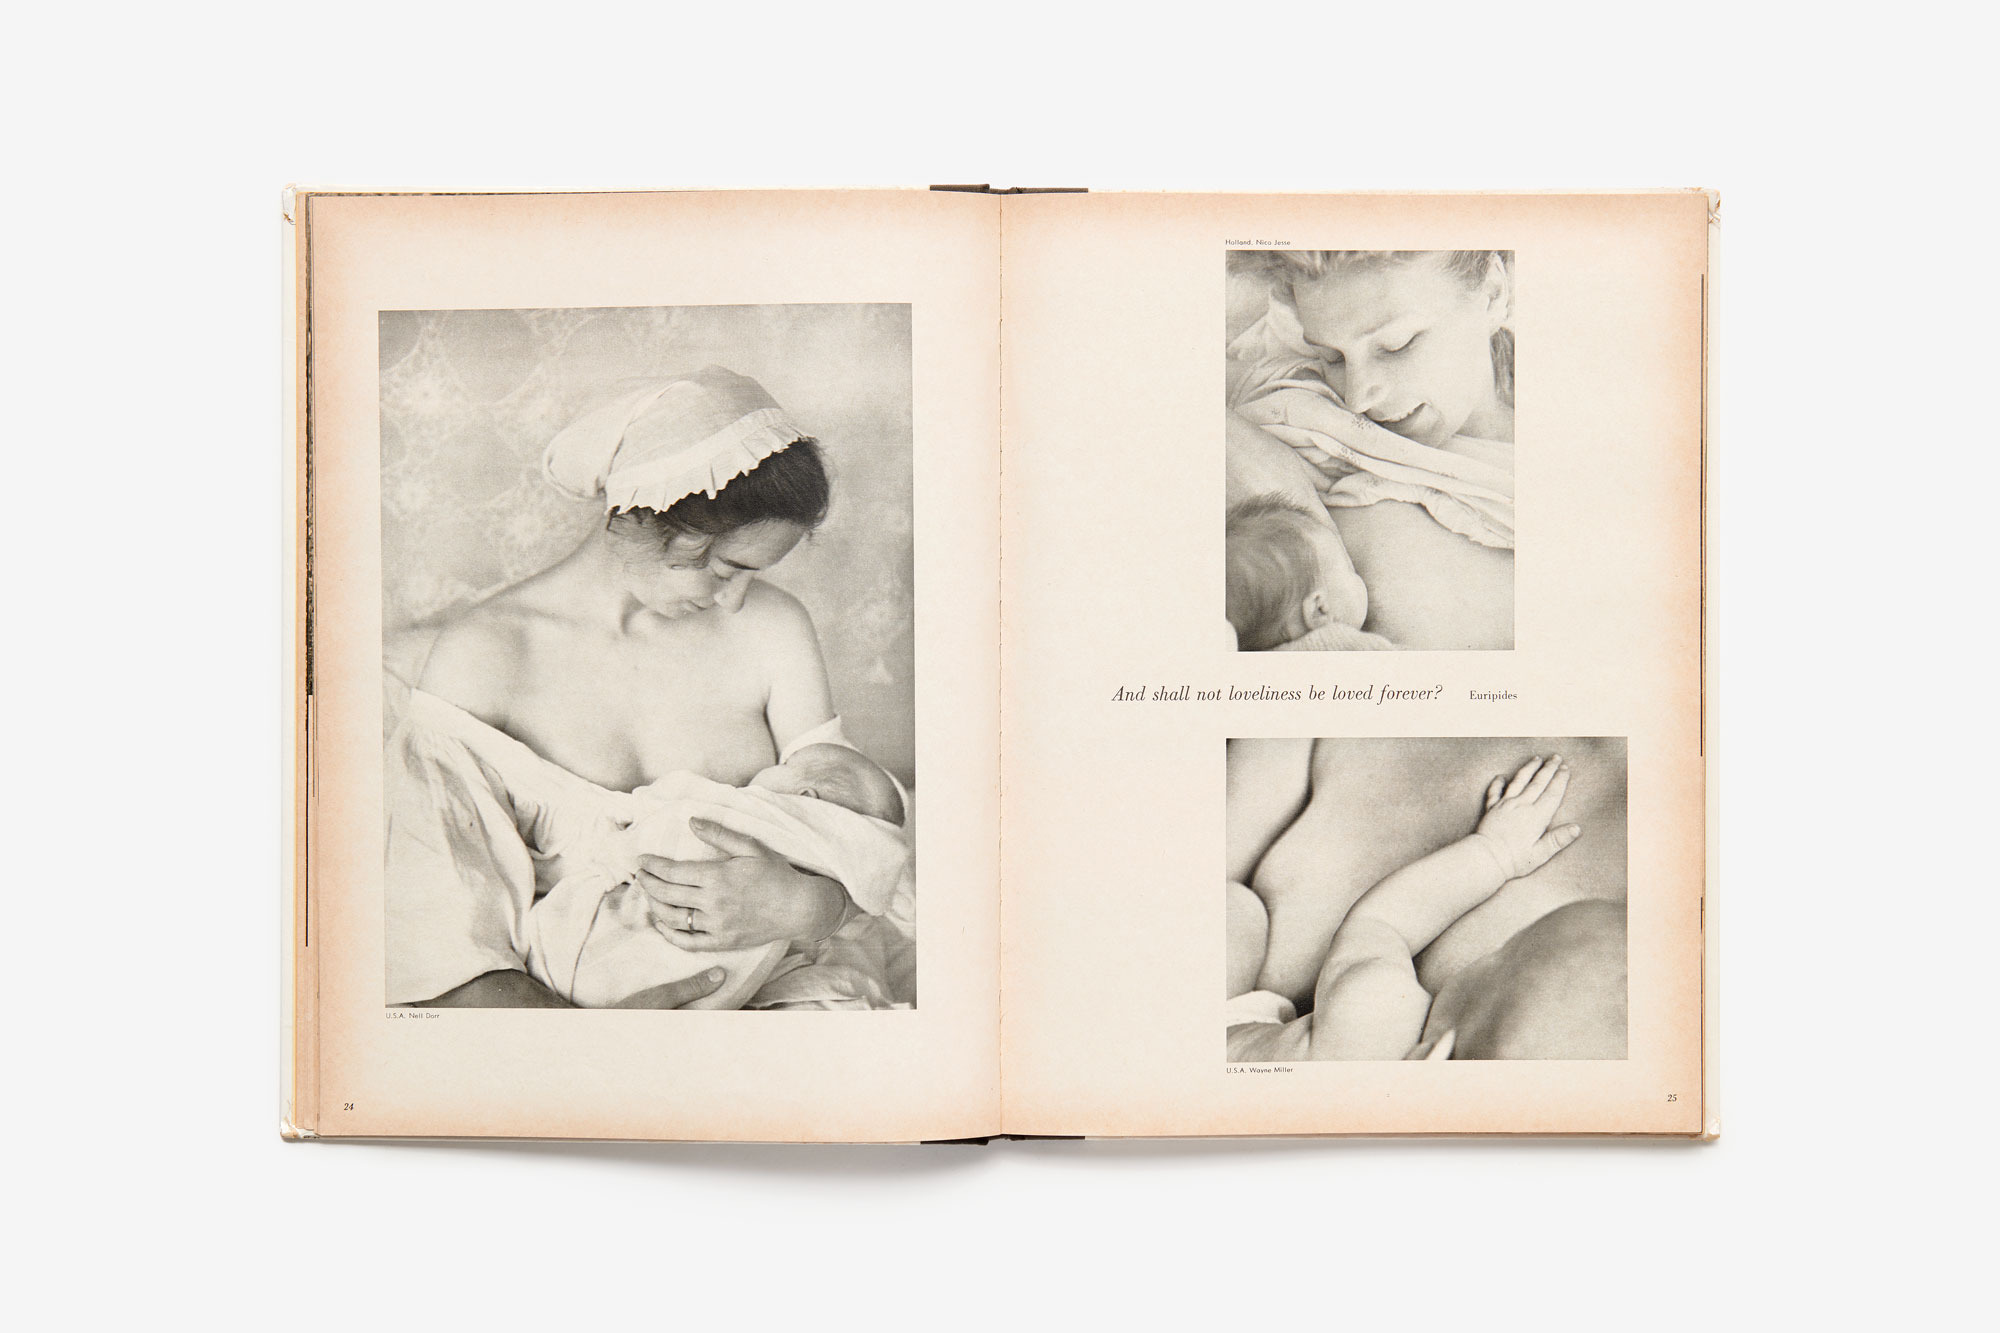 The Family of Woman by Jerry Mason, featuring photos of three women nursing their babies.